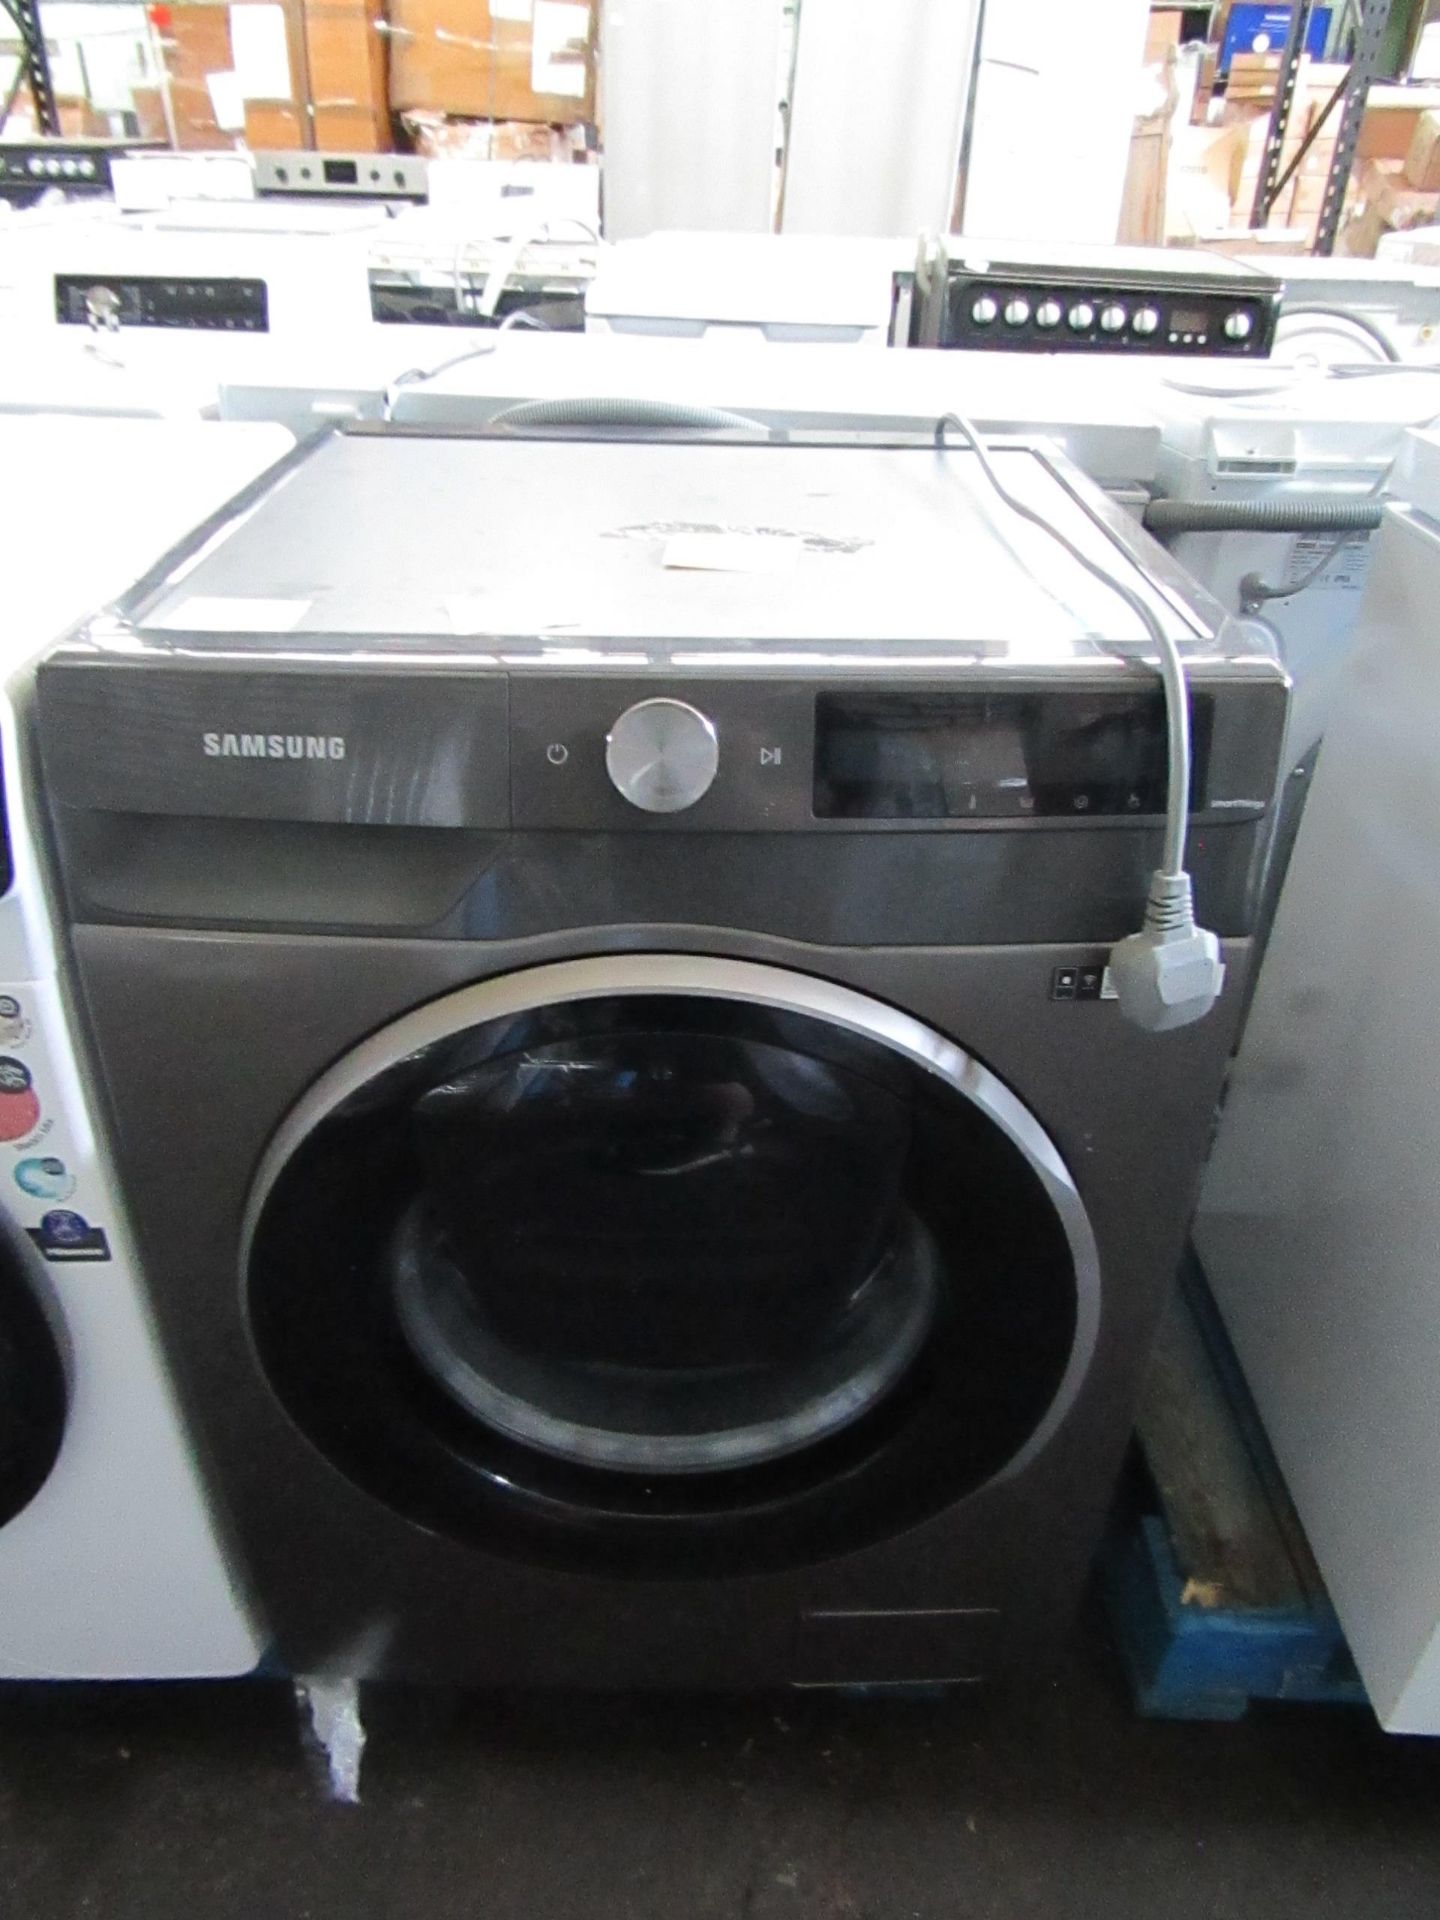 Samsung ww90t684dlh Smart add wash washing machine, powers on and spins but we have not connected it